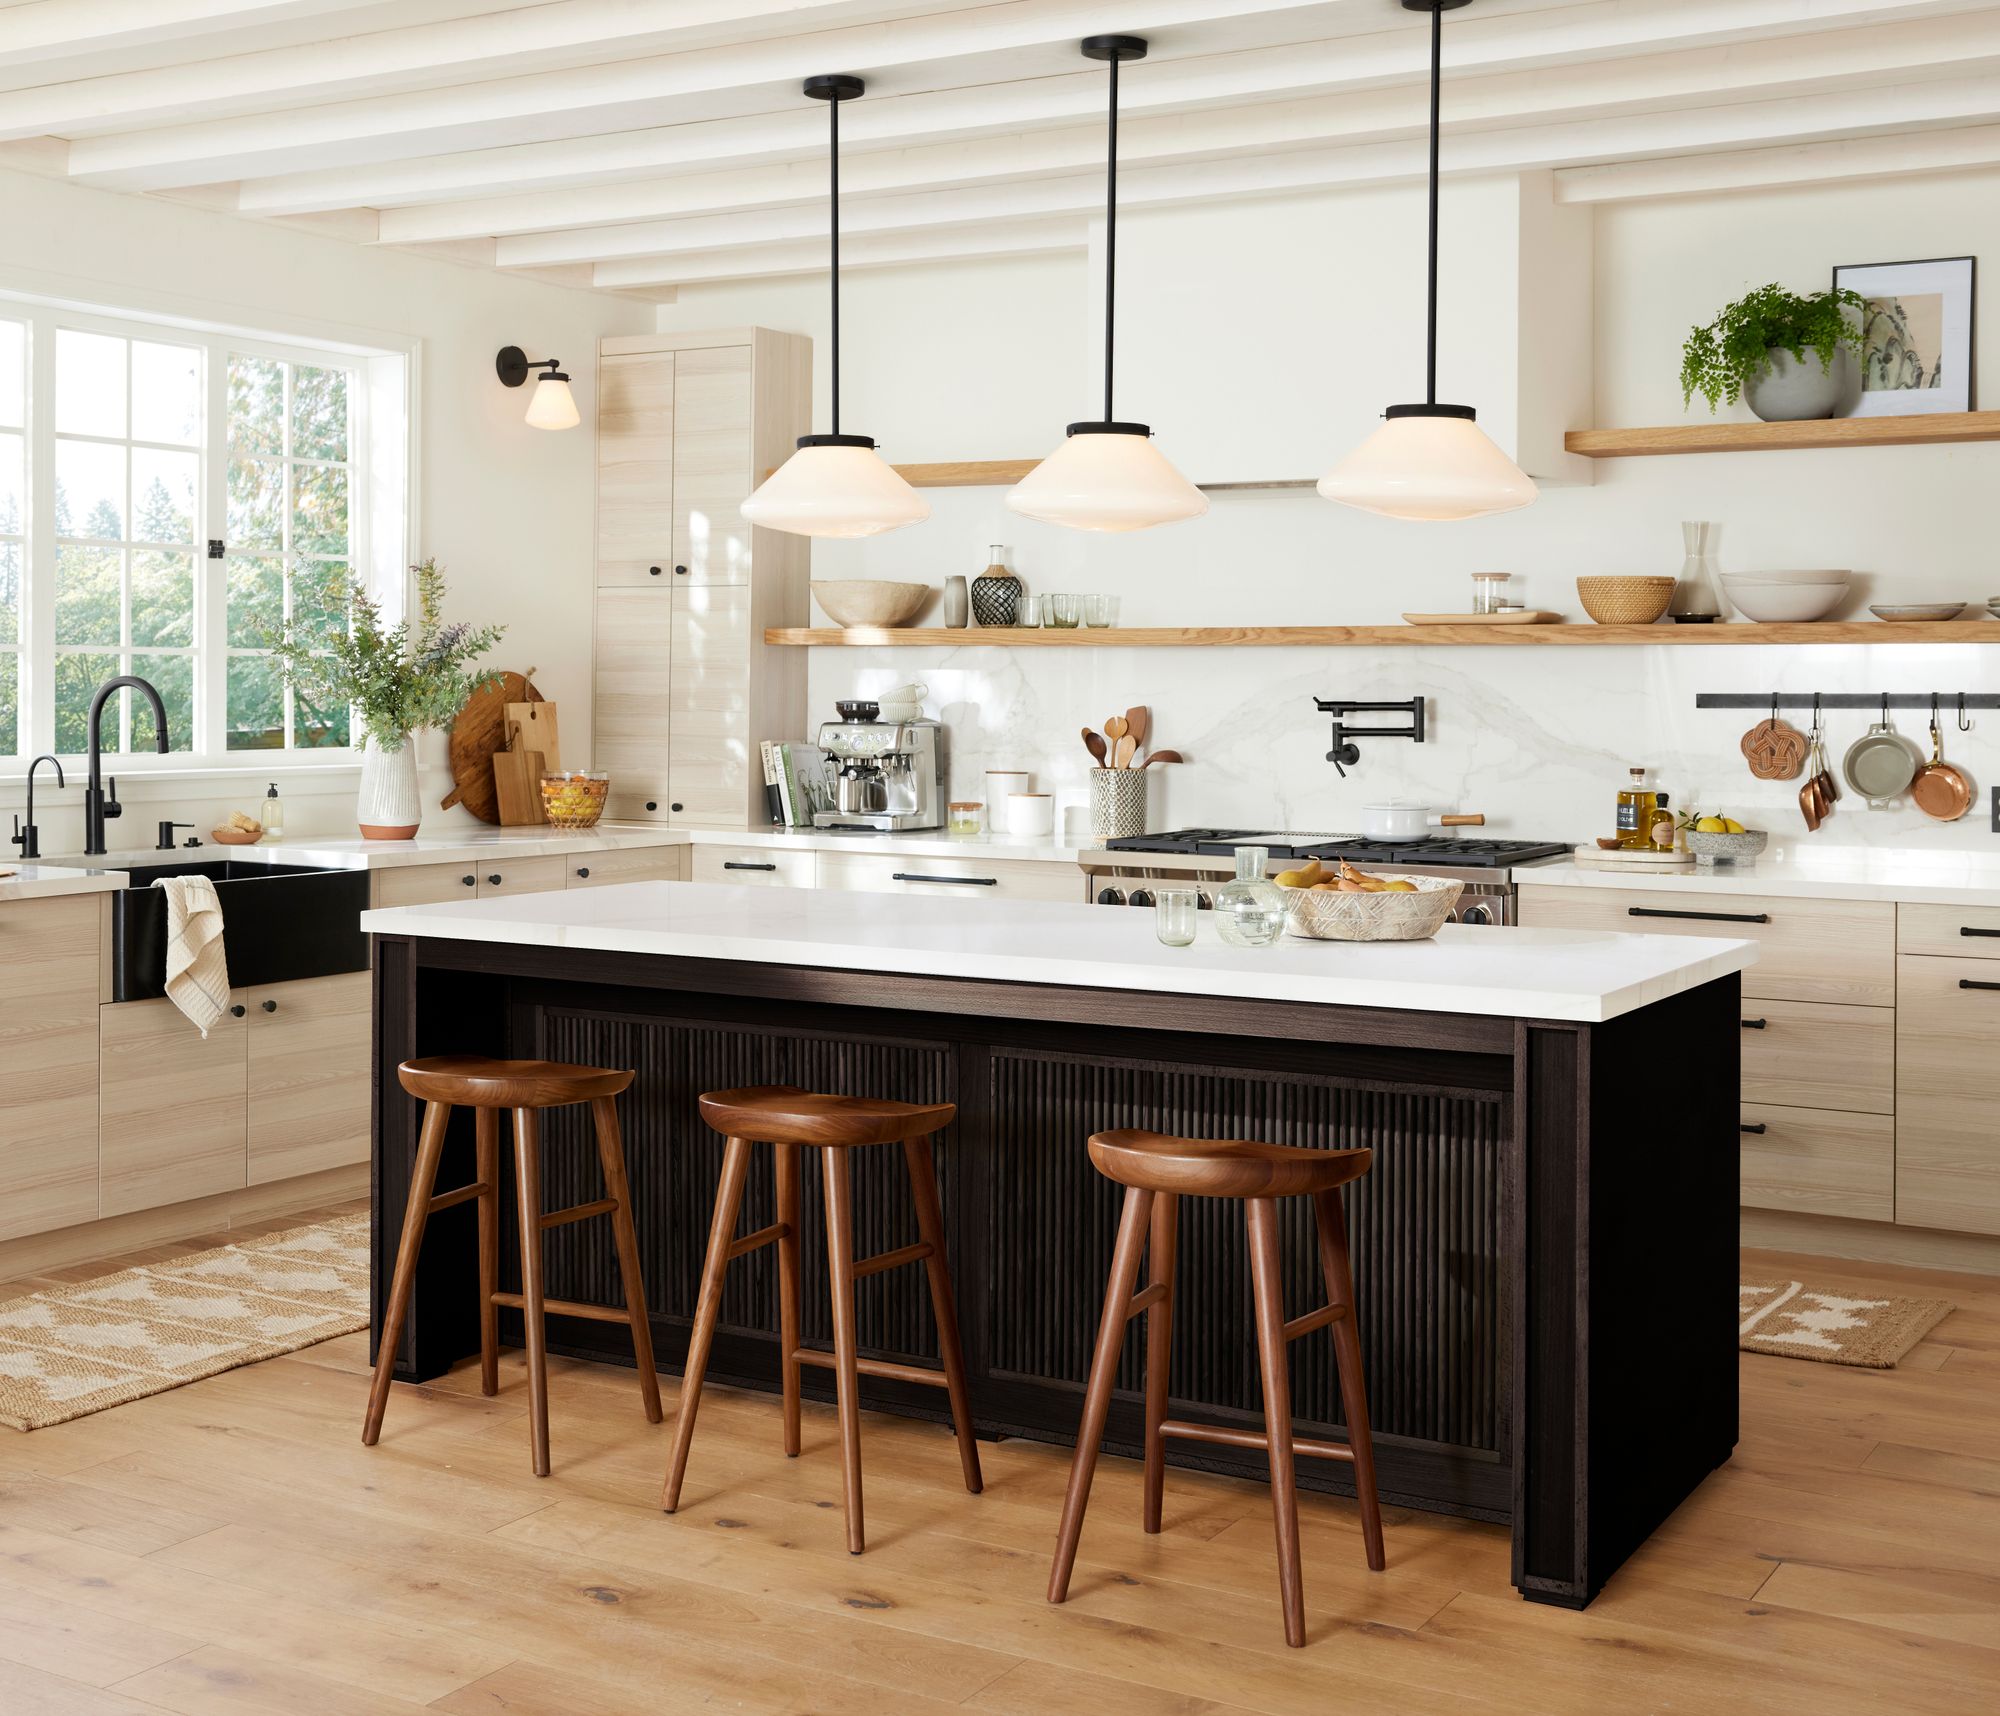 How to Your Kitchen Island